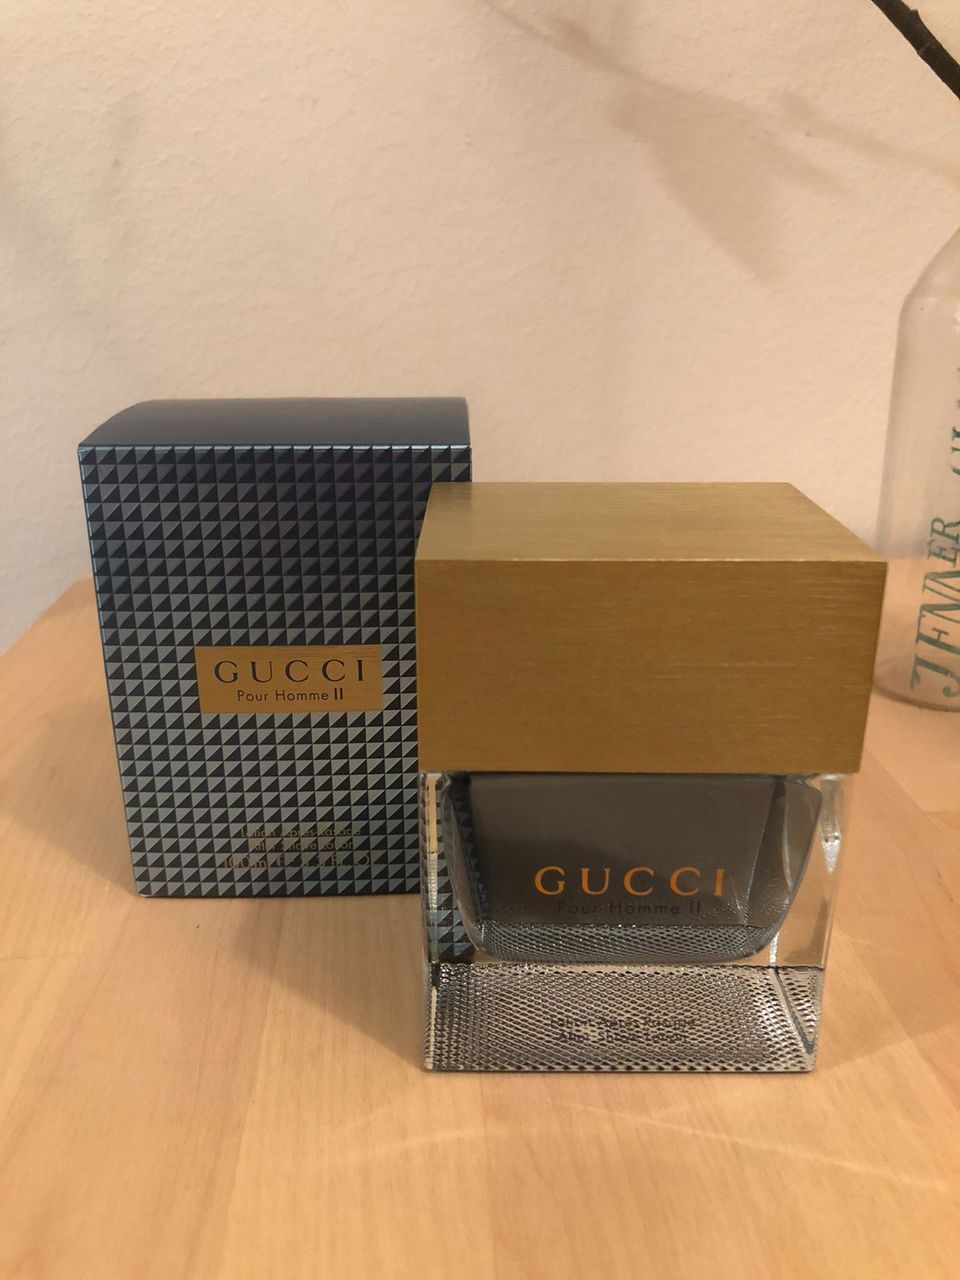 Gucci II After Shave 100 ml